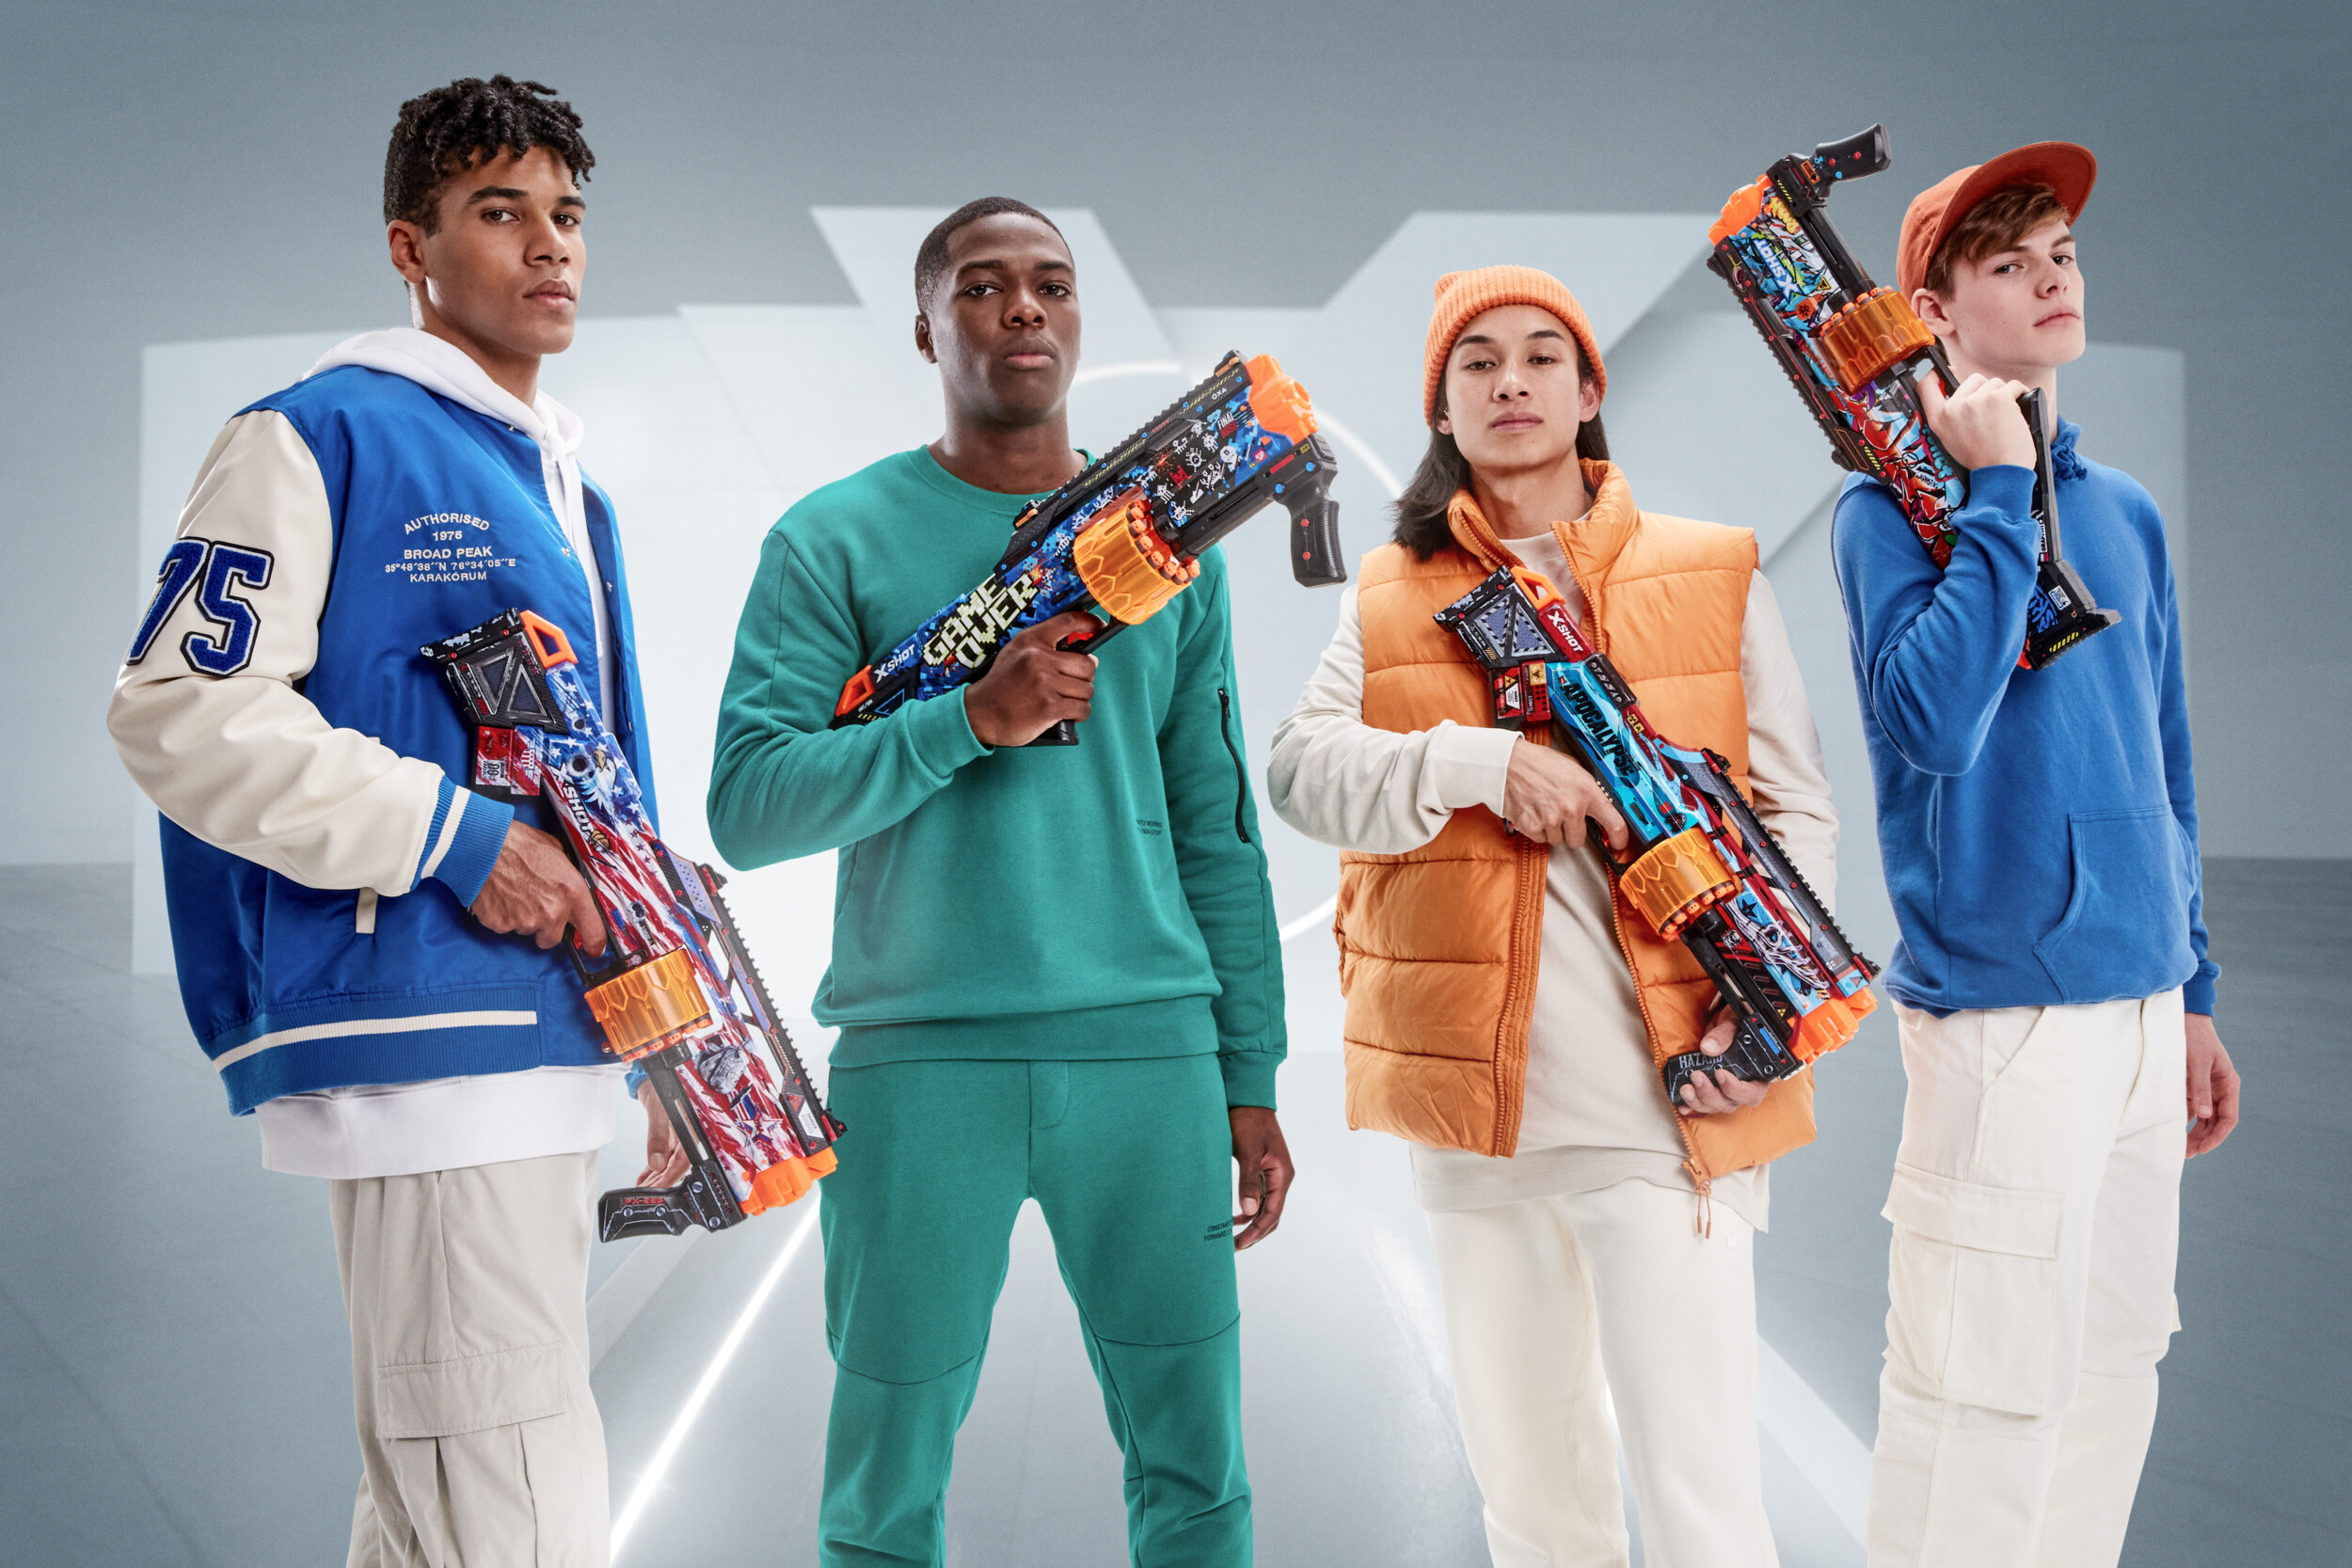 Zuru's X-Shot takes top spot in blasters and shooters through July